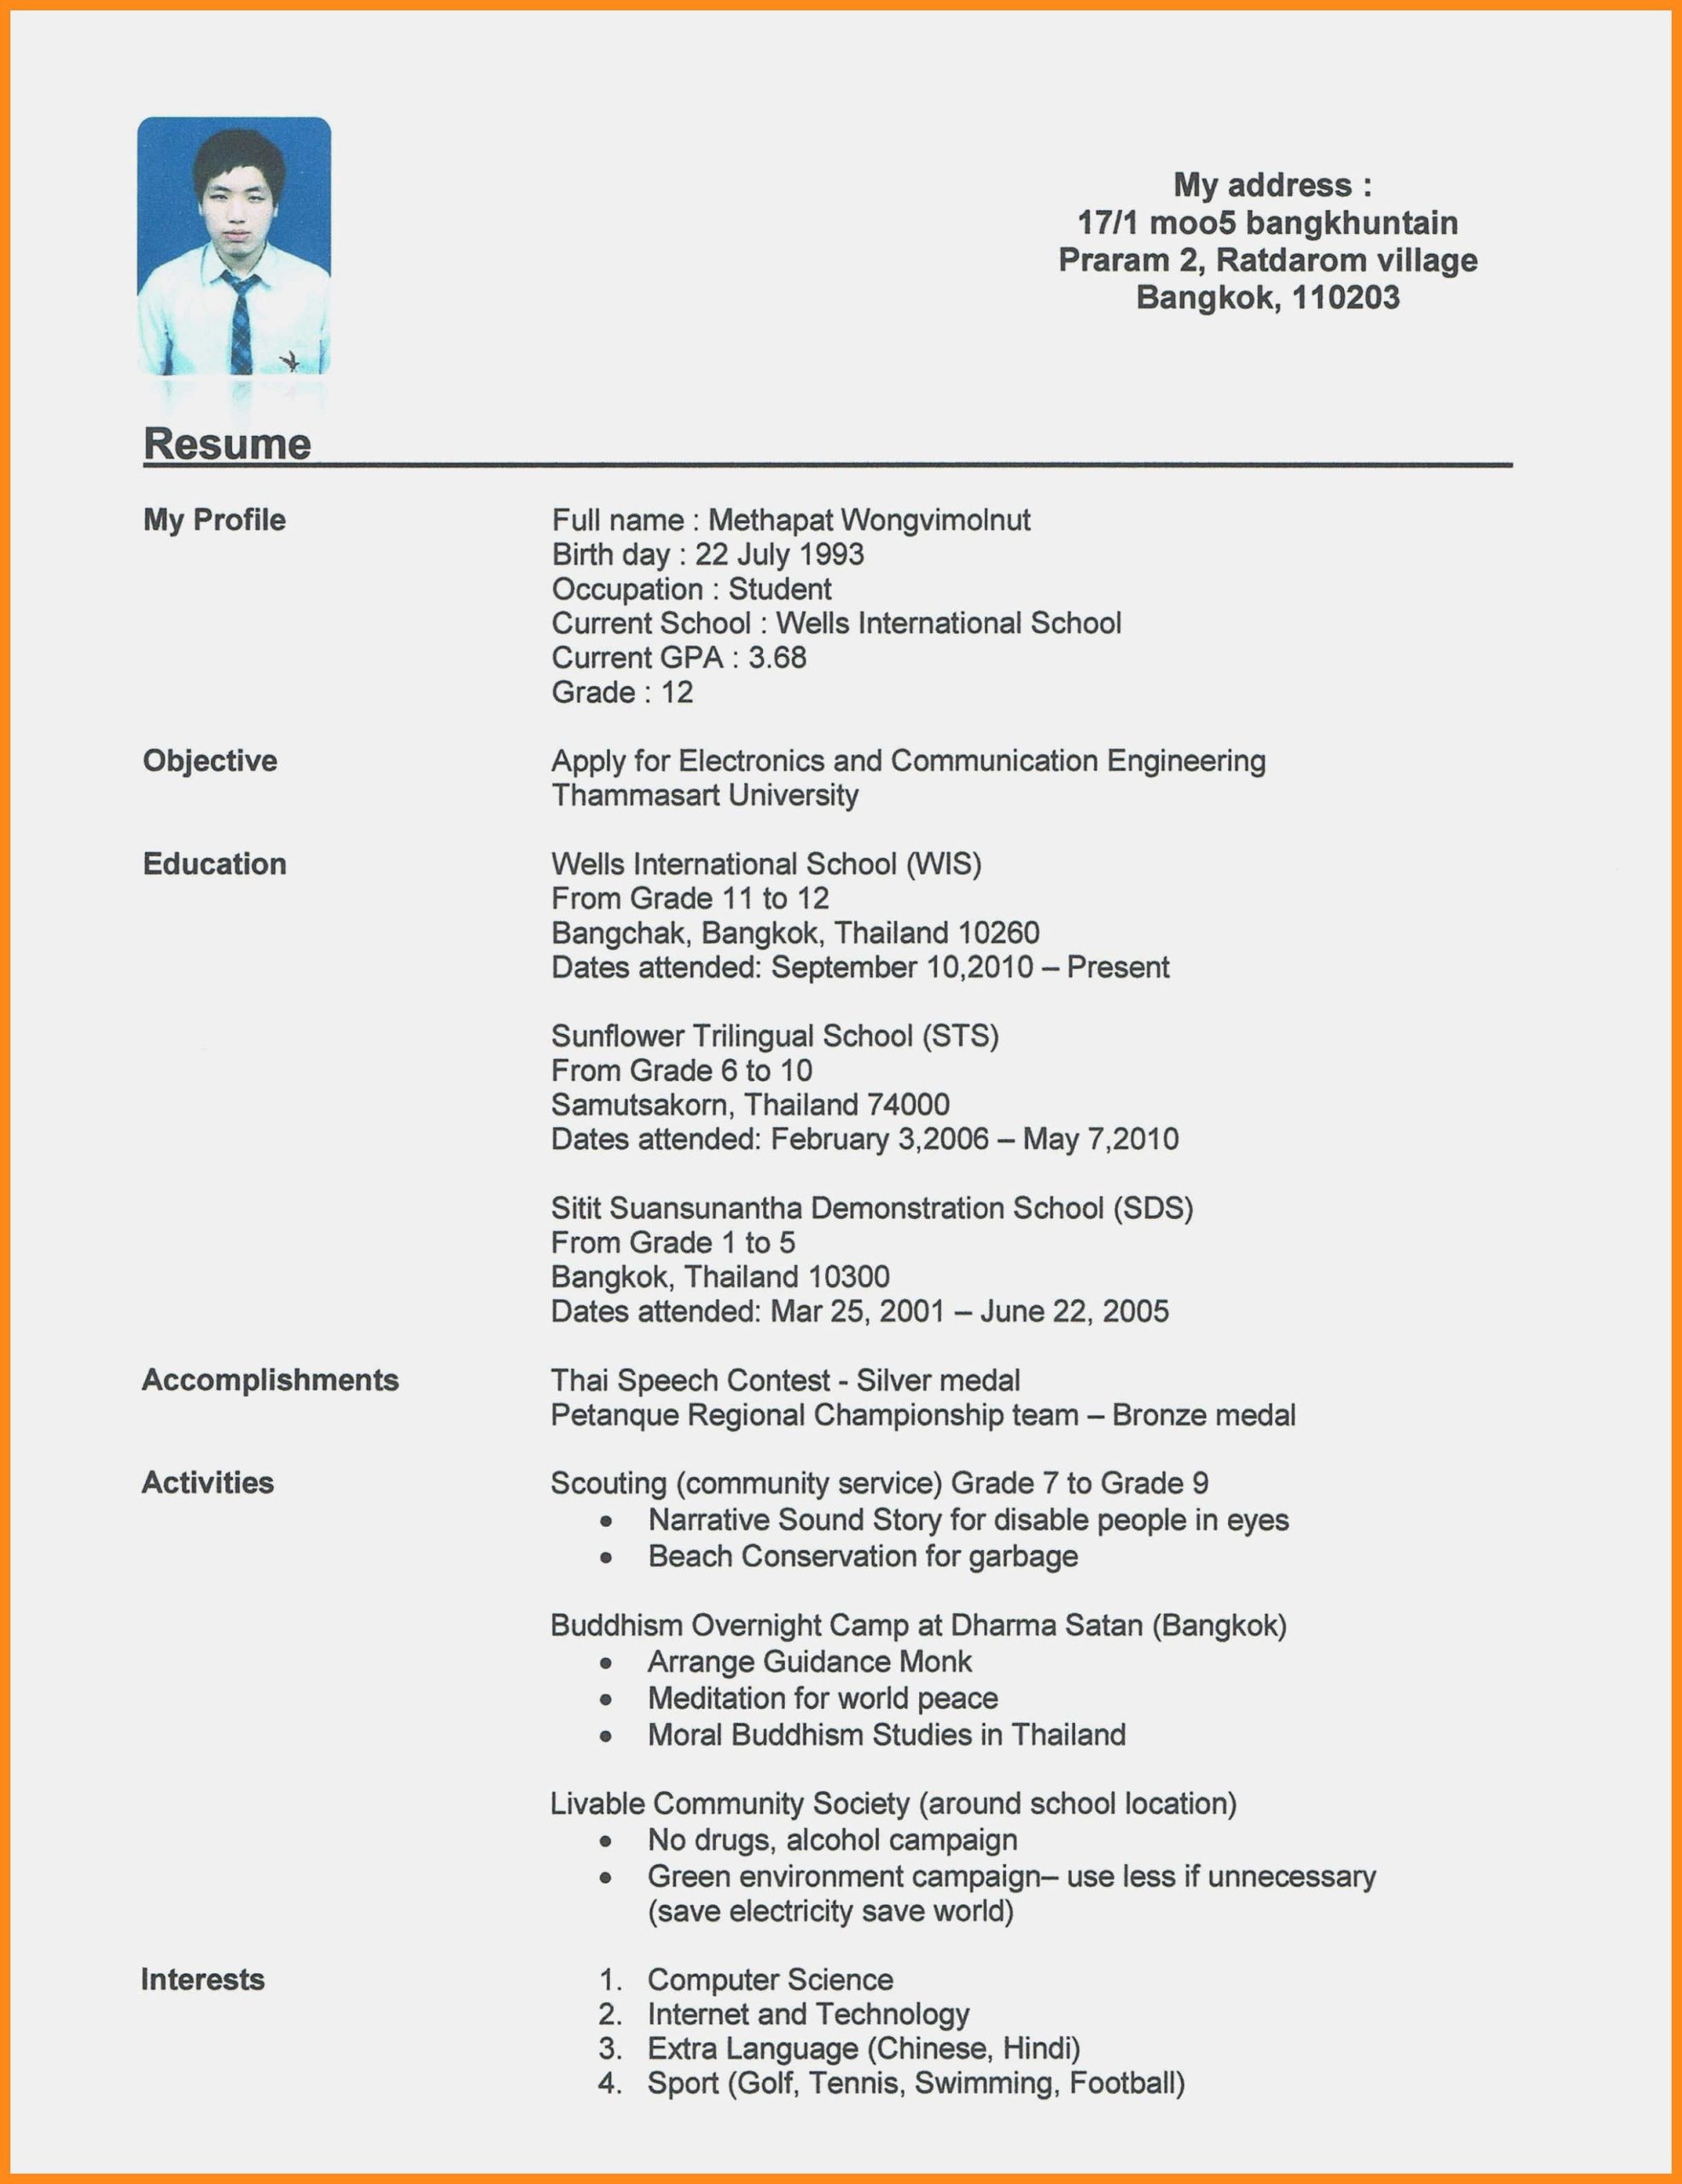 Applying for First Job Resume Samples Resume Template for First Job Addictionary